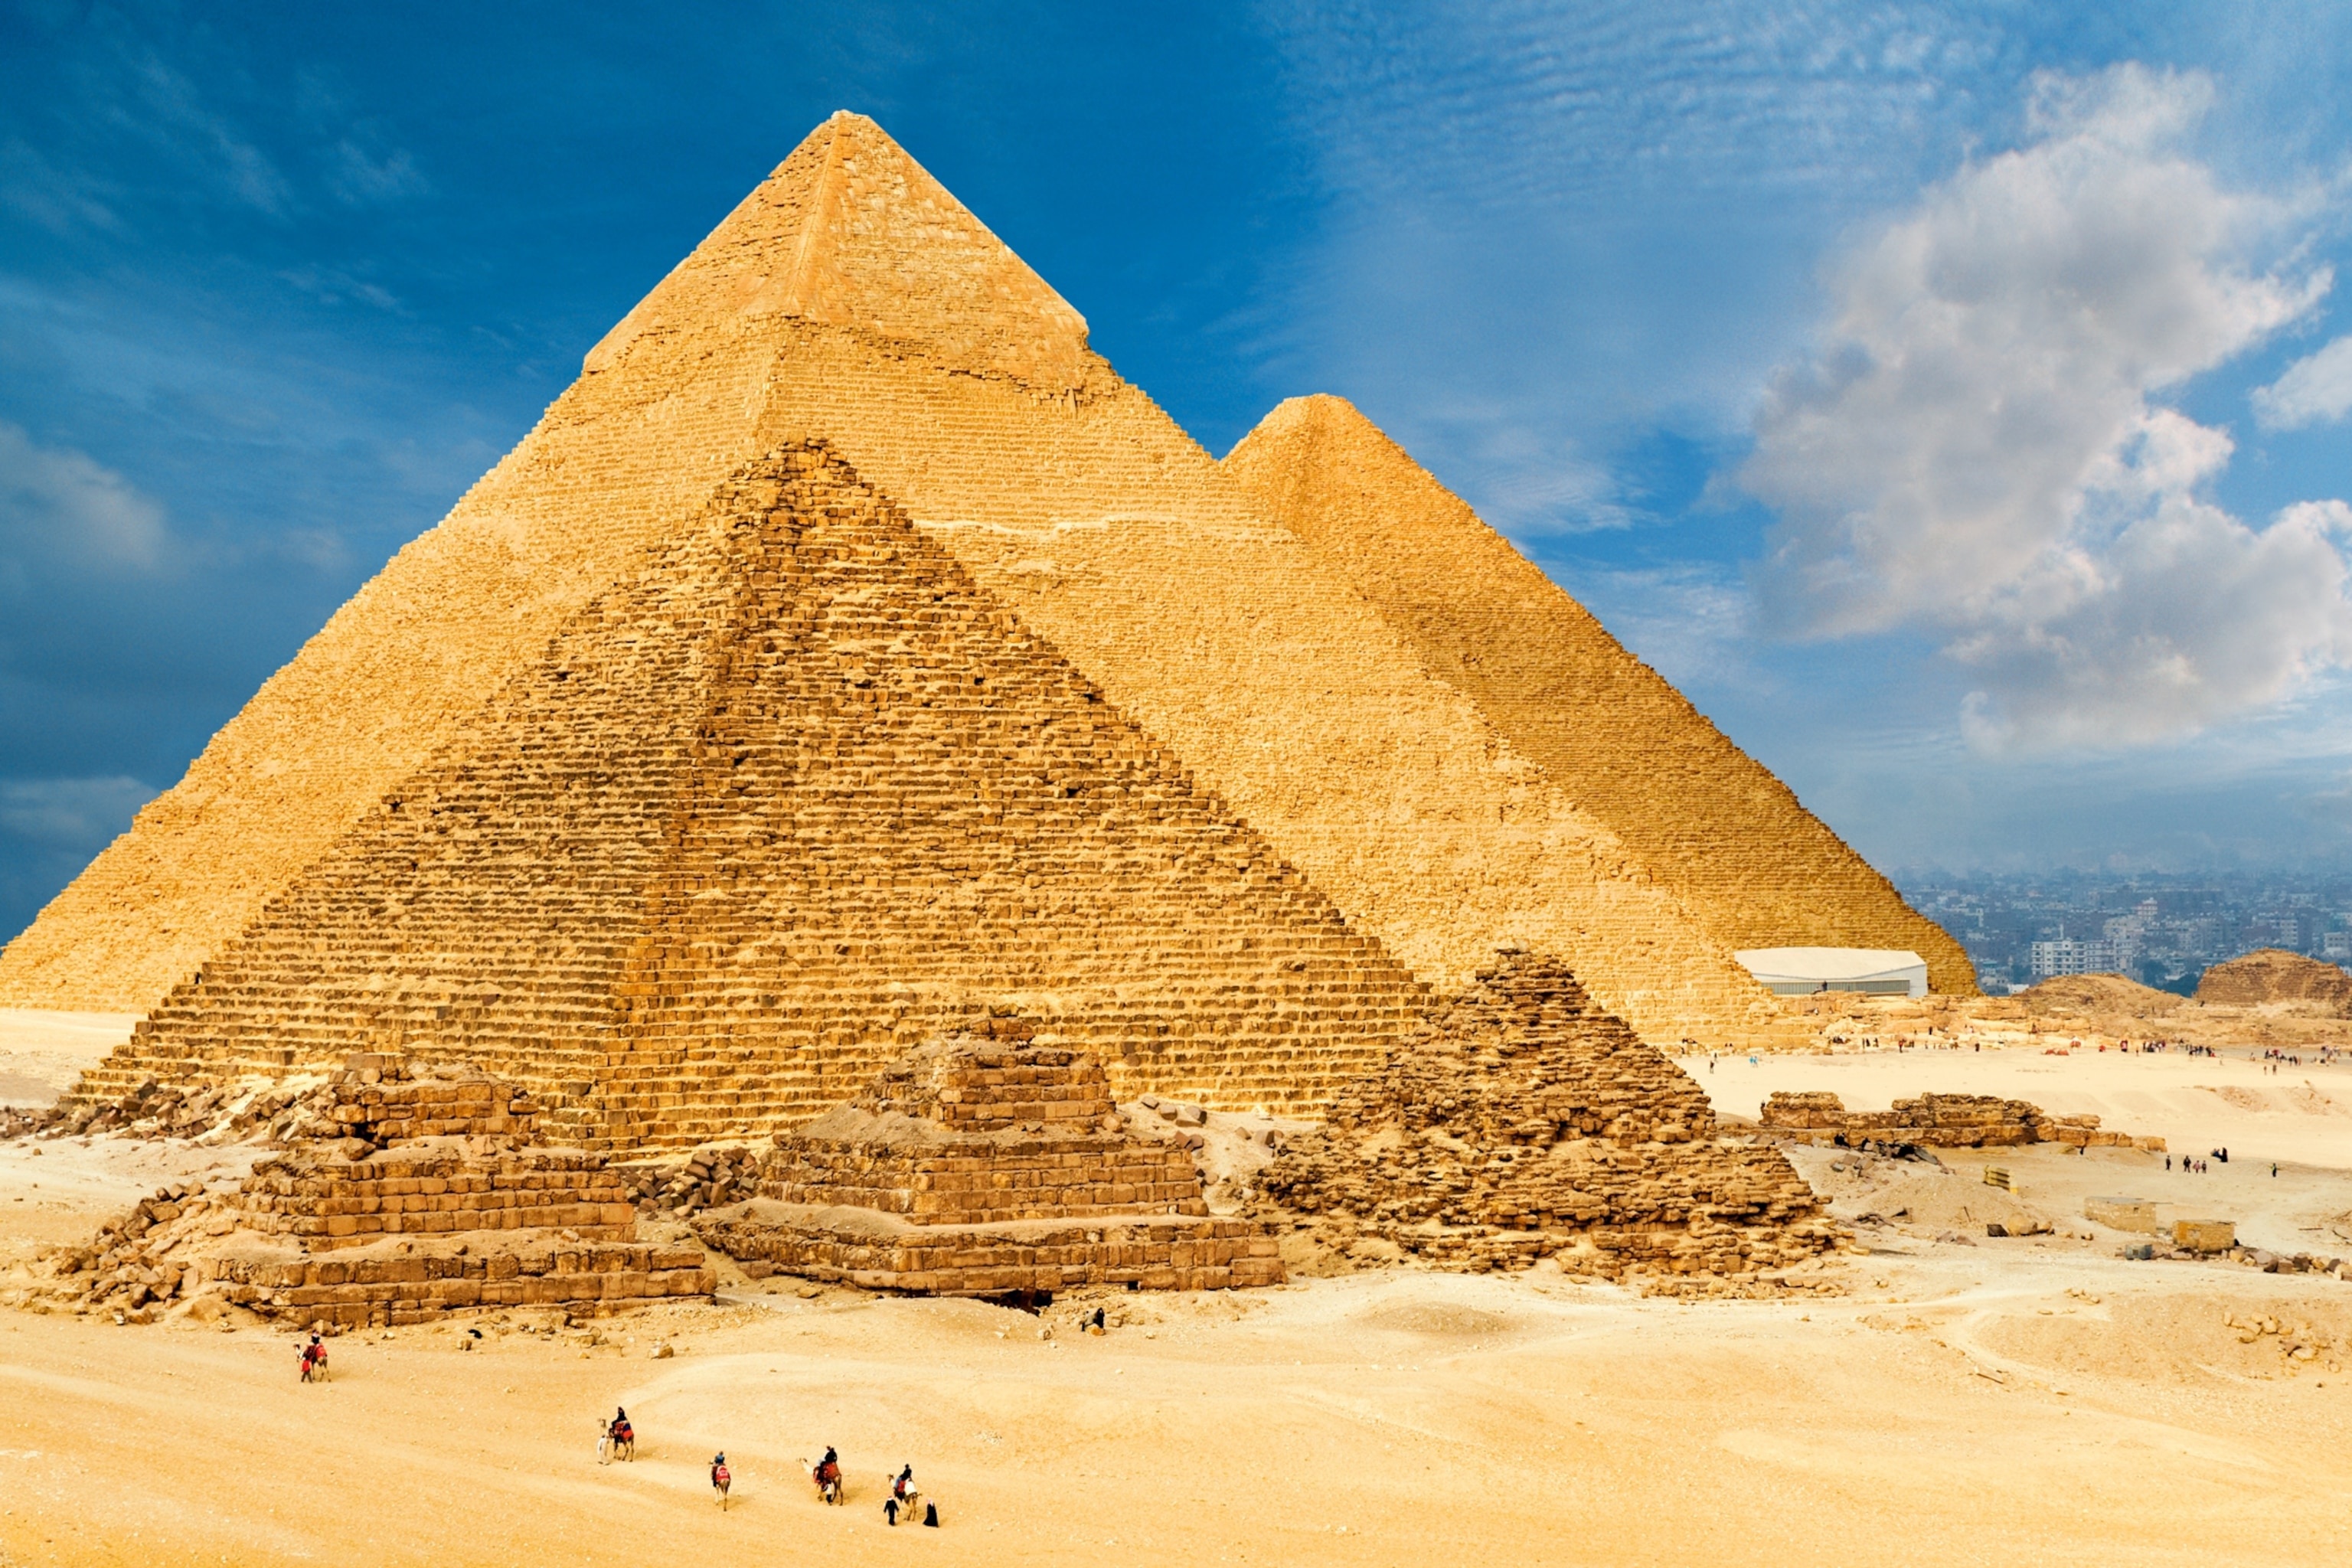 Pyramids of Giza, Ancient wonder, National Geographic marvel, Mysteries of Egypt, 3080x2050 HD Desktop